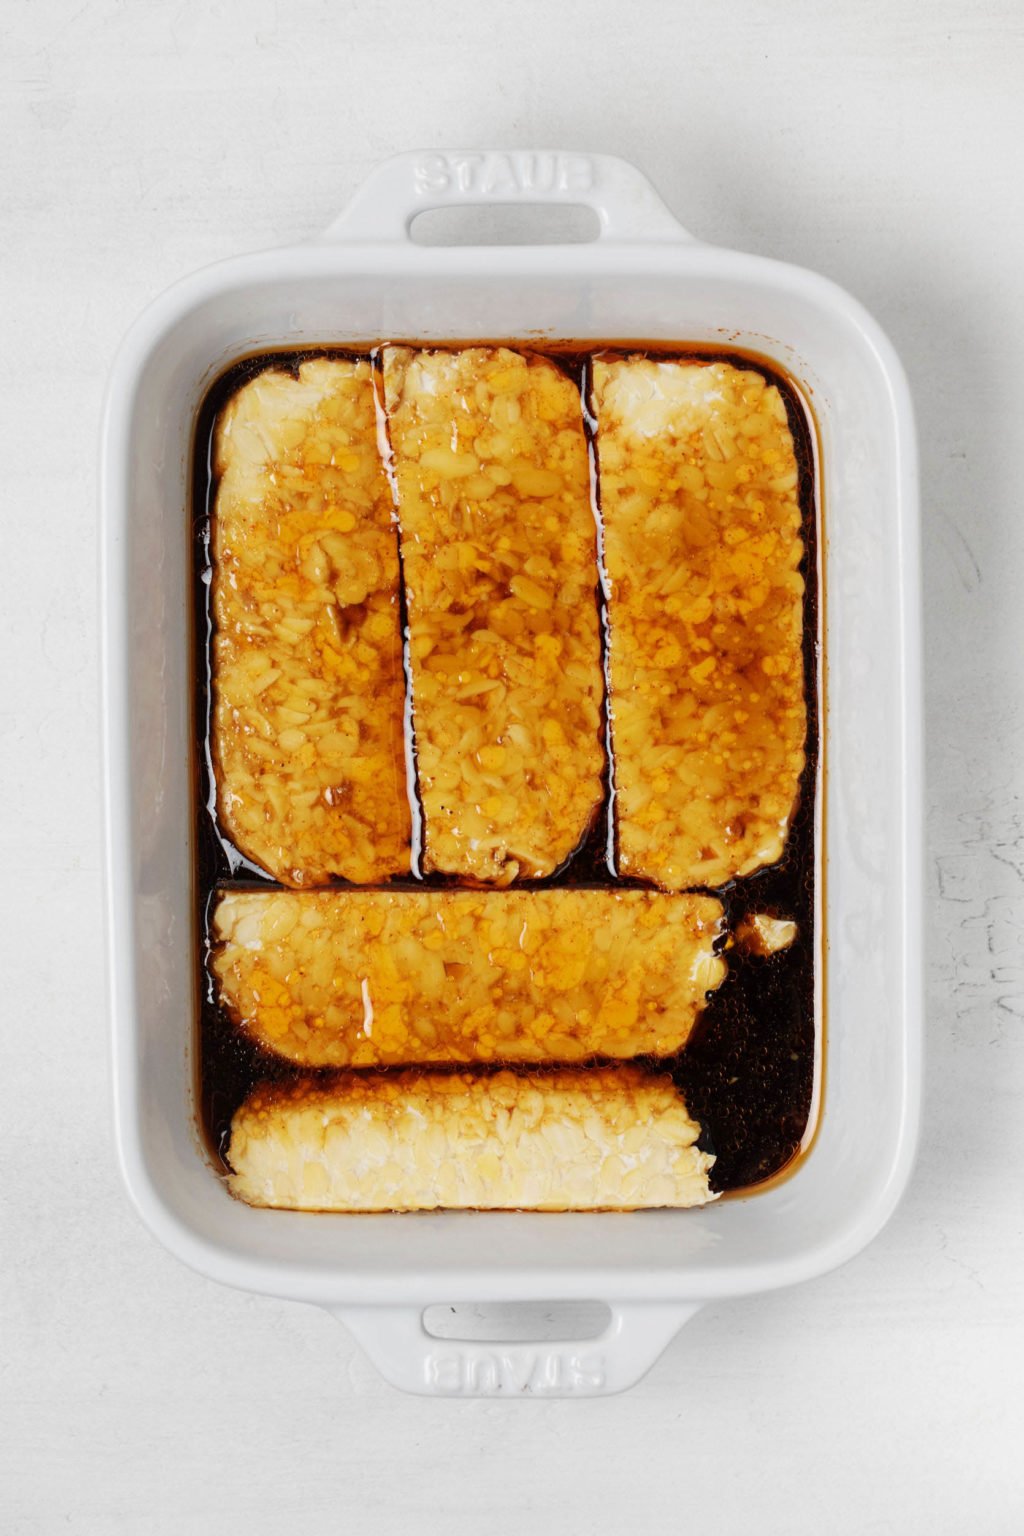 Strips of a vegan protein are lined up in a baking dish, marinating in a deep amber marinade. The dish rests on a white surface.